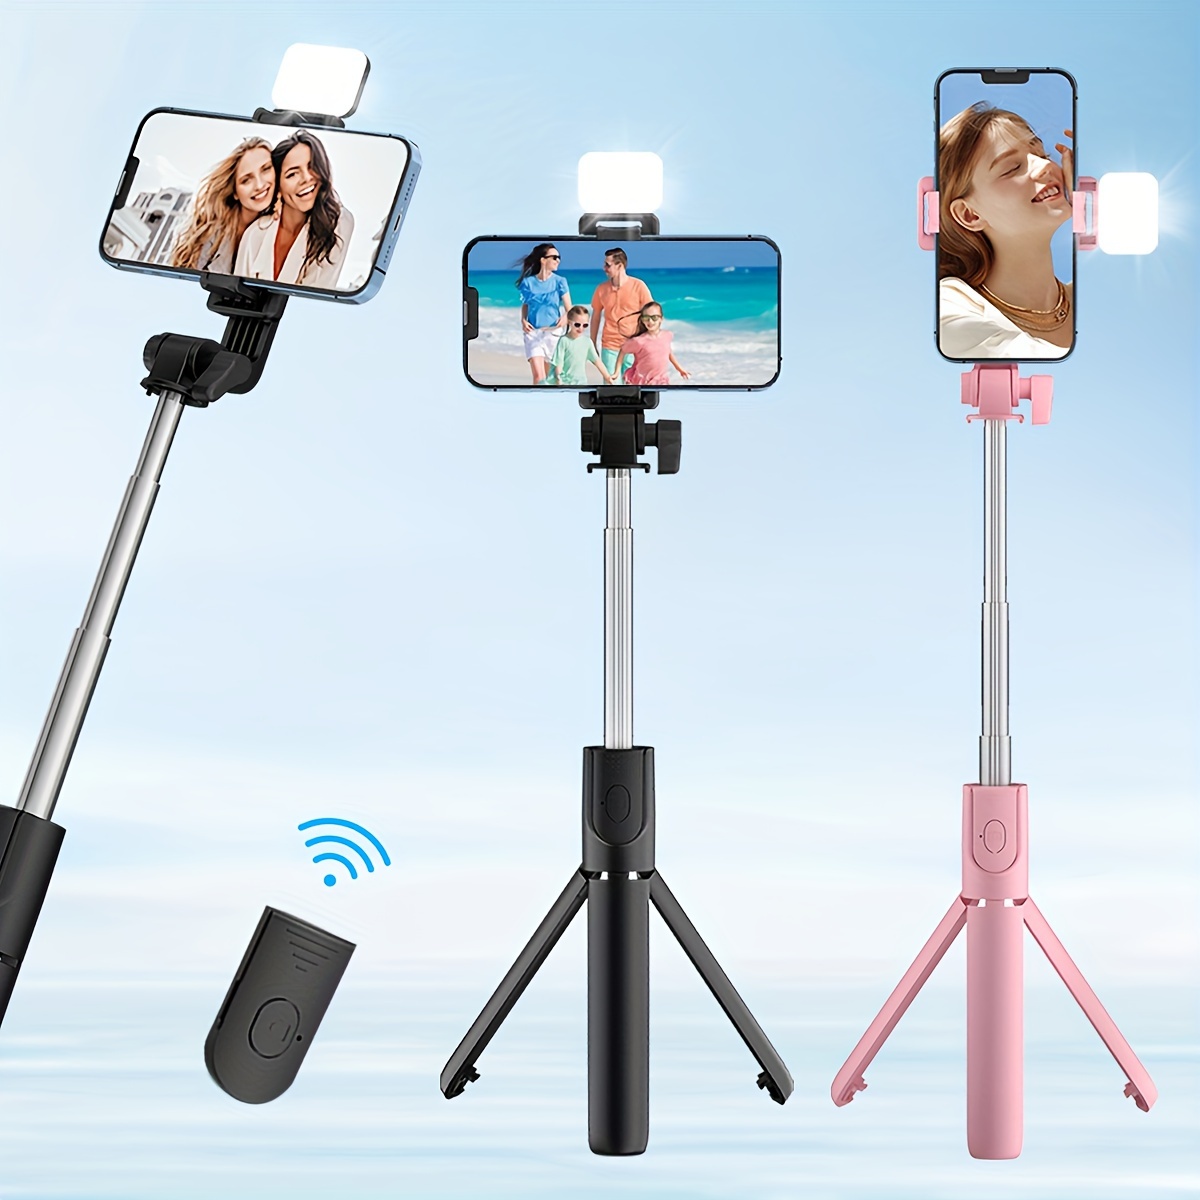 

Mini Selfie Stick With Integrated Fill Light, A Portable Photography Tool For Travel, Specially Designed For Live Streaming, Ultra-lightweight And Compact, With An Extended Phone Holder For Selfies.